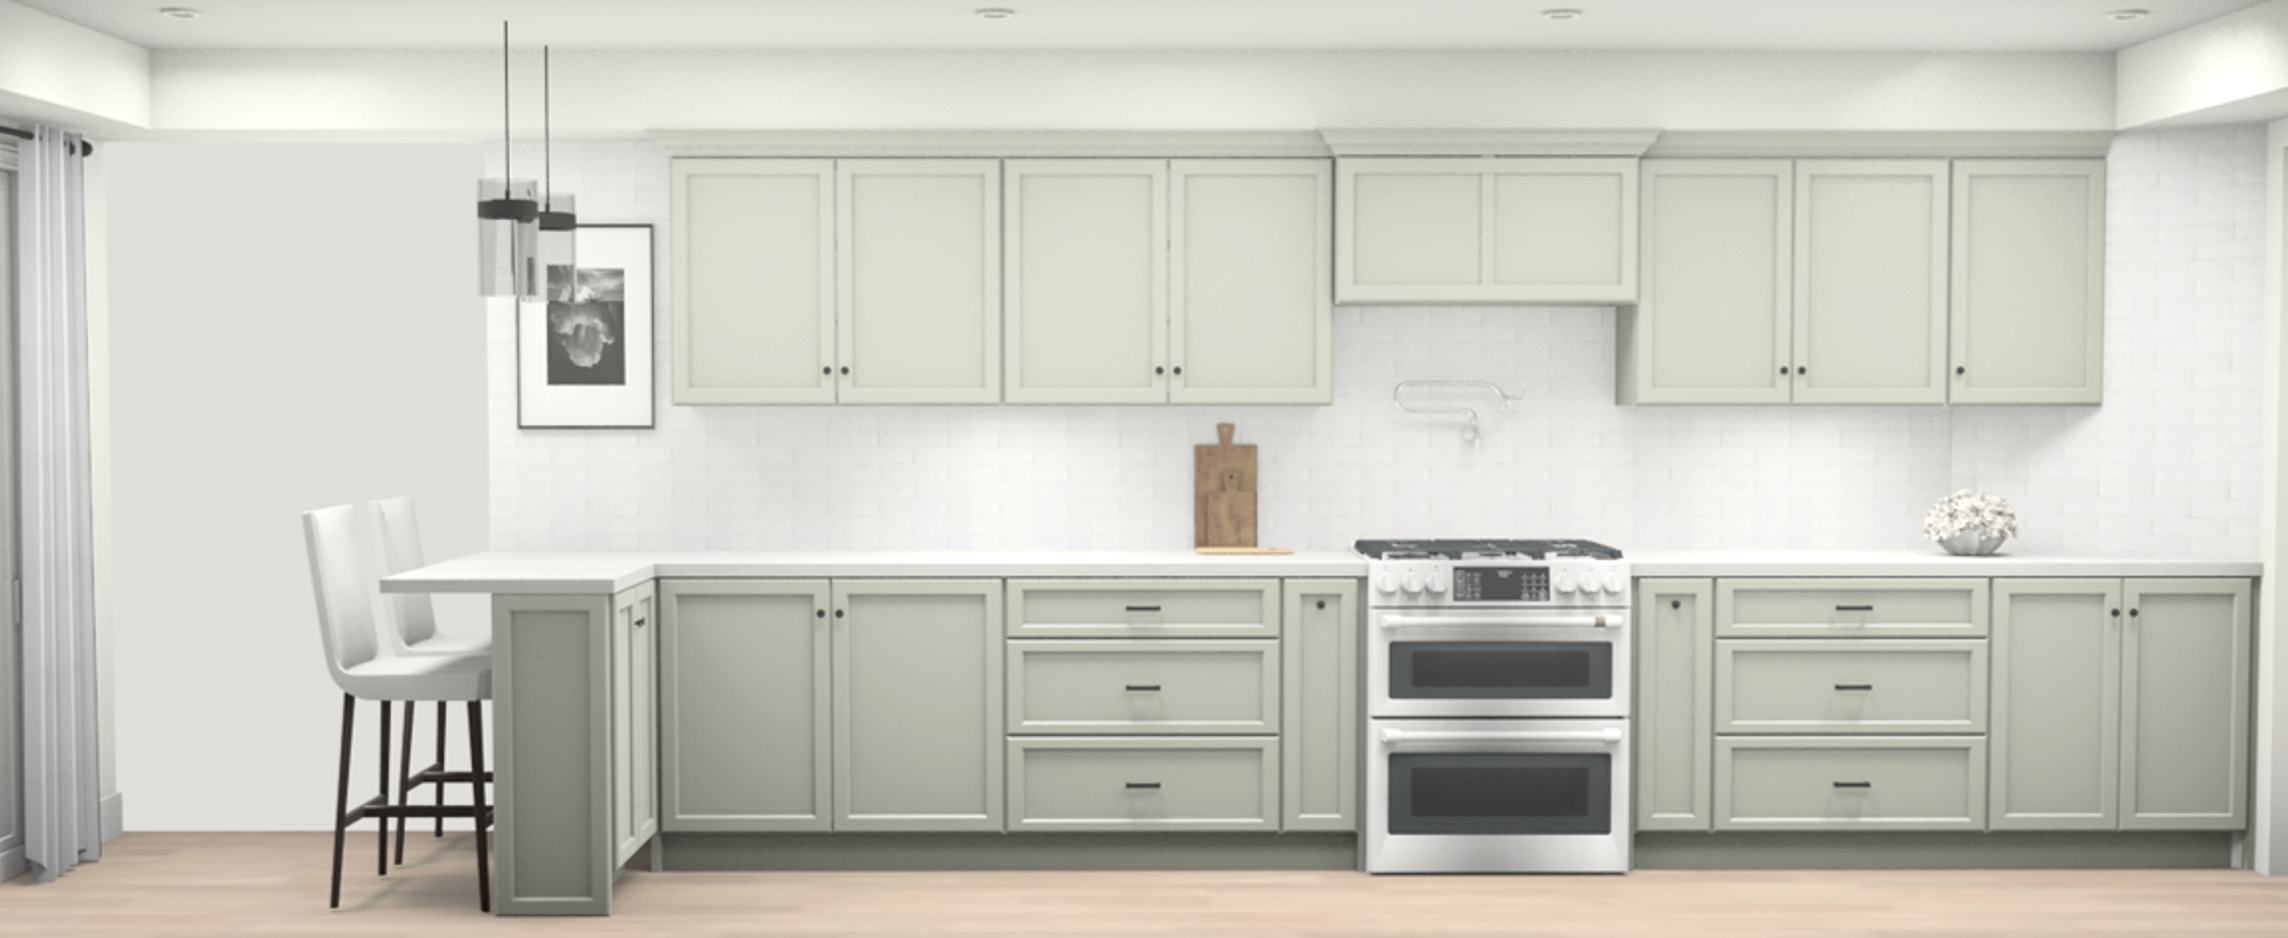 #D Rendering of kitchen design with custom sage green cabinetry